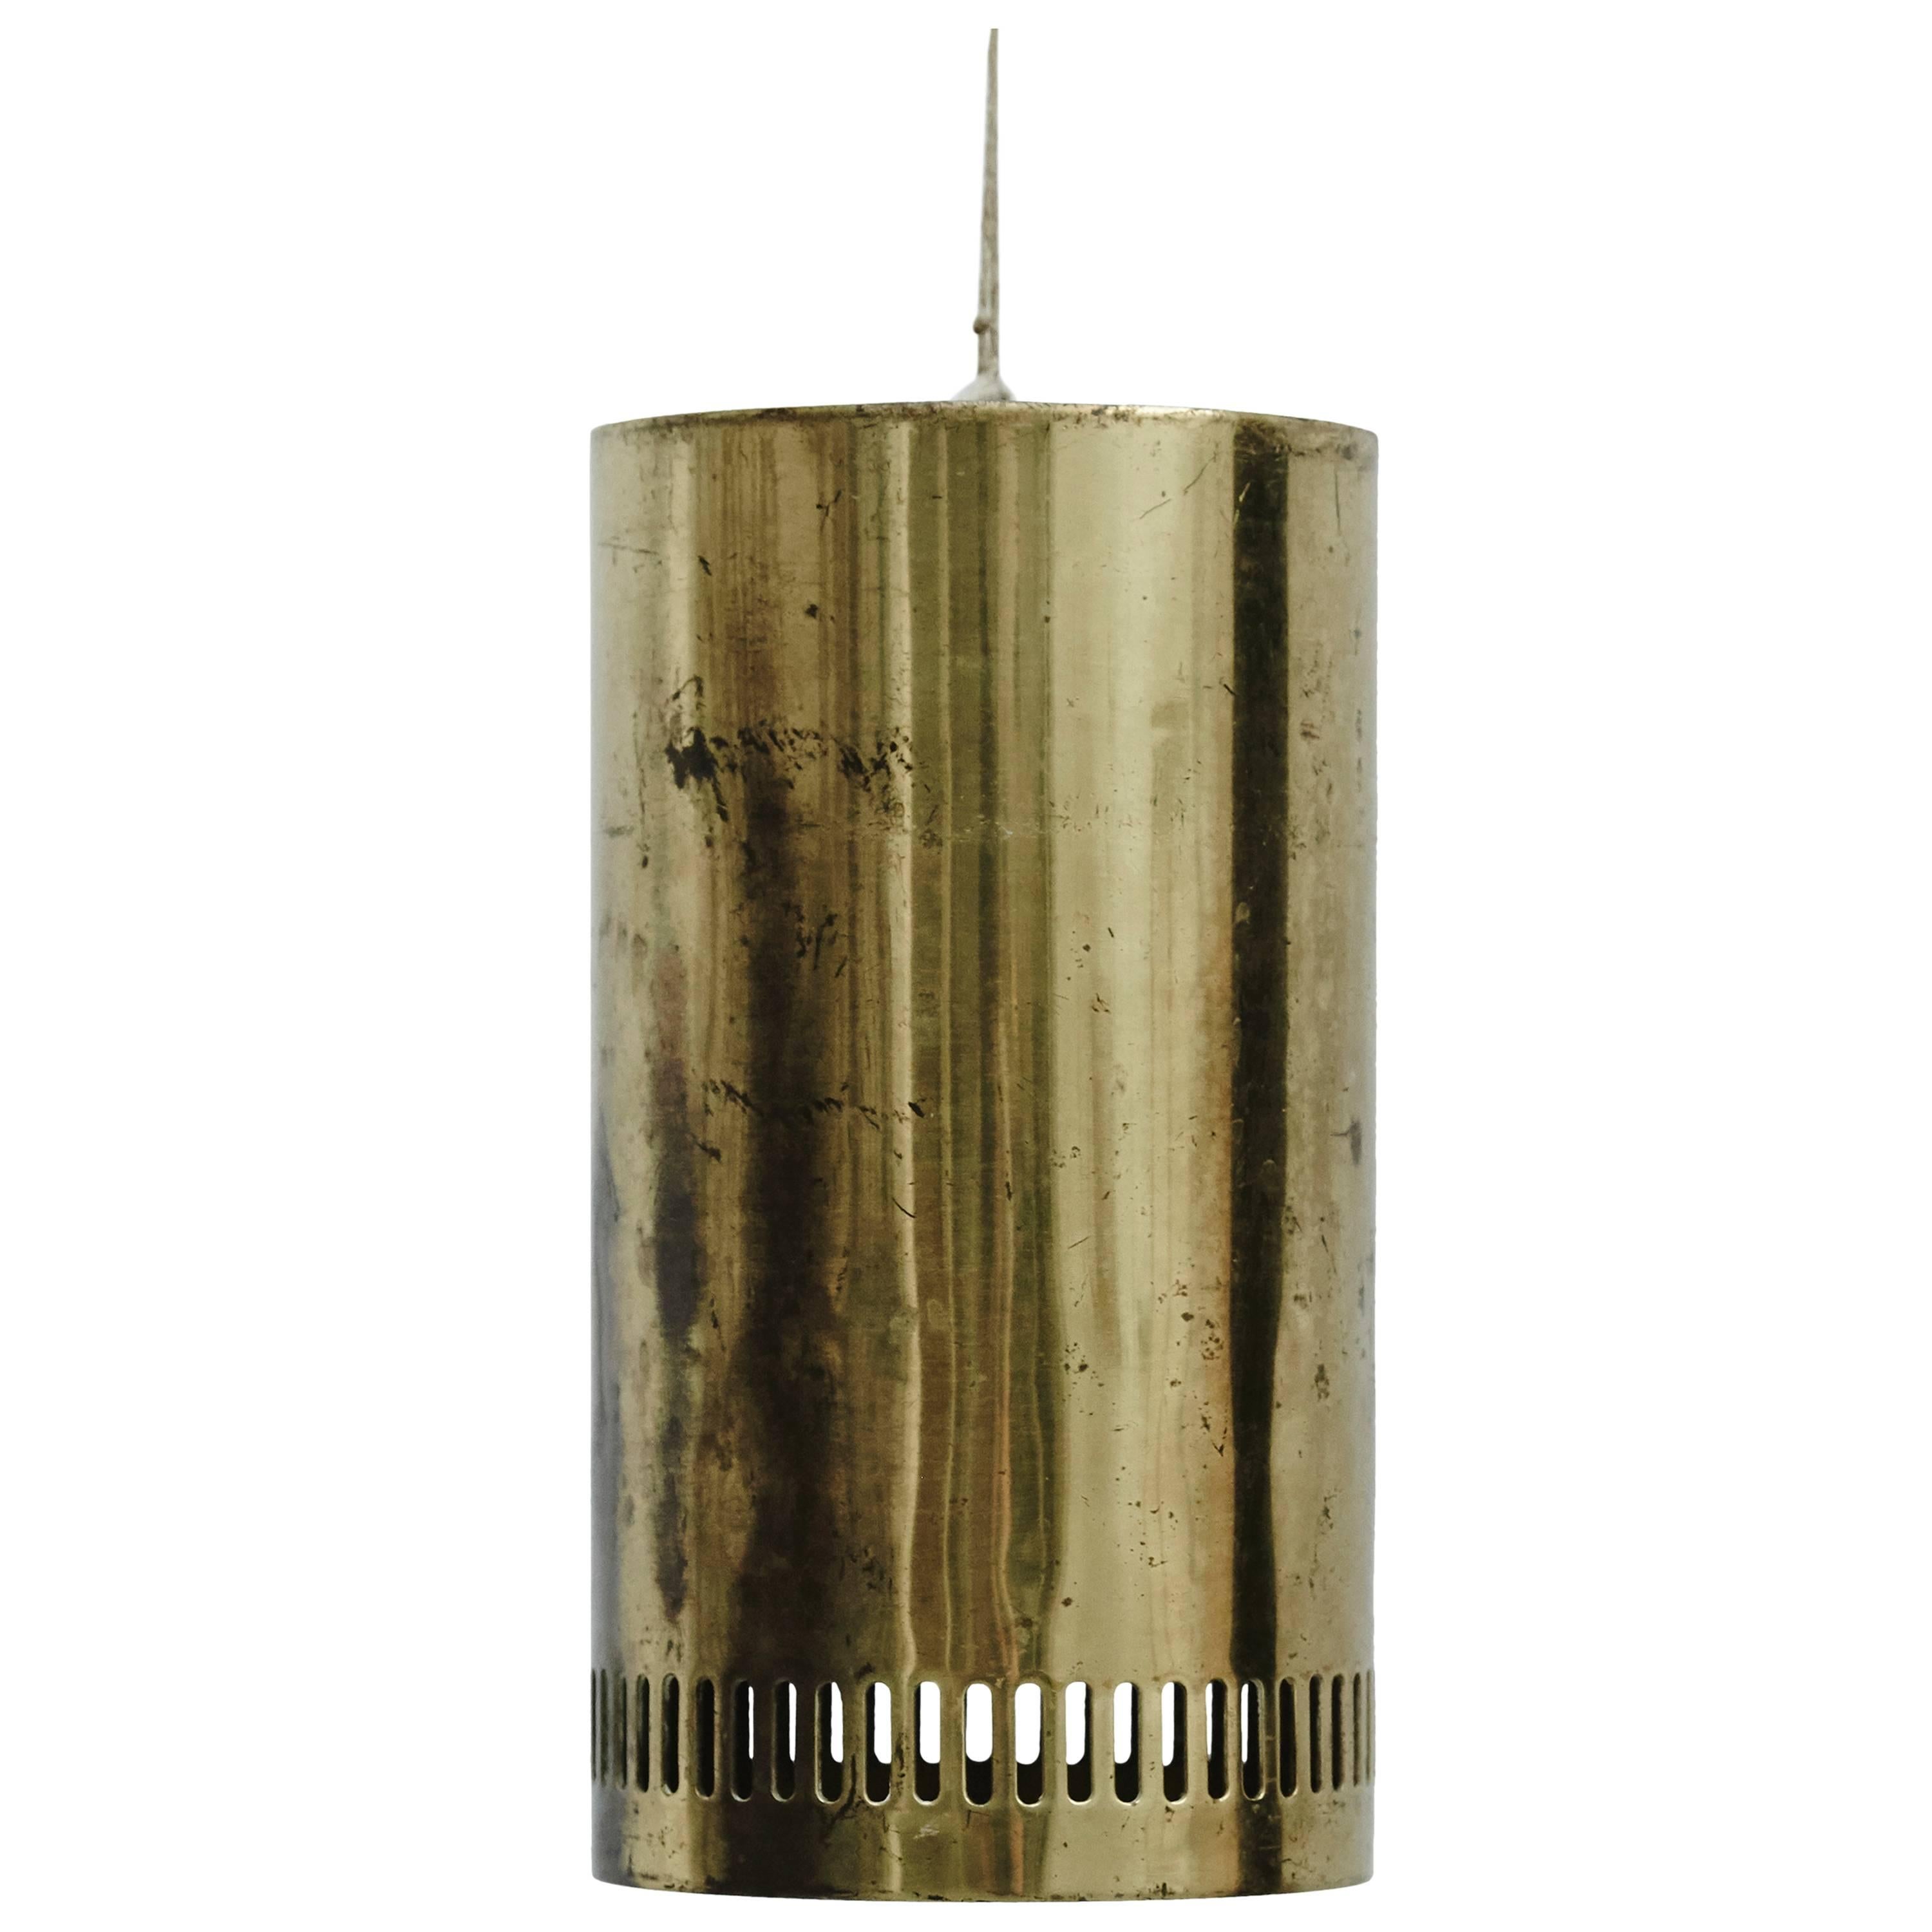 Pendant lamp designed by Unknown artist.
Lamp in style of savoy lamp by Alvar Aalto, circa 1935 in Helsinki.
Doesn’t include lighting system or bulb as shown on the photo

In original condition, with minor wear consistent with age and use,